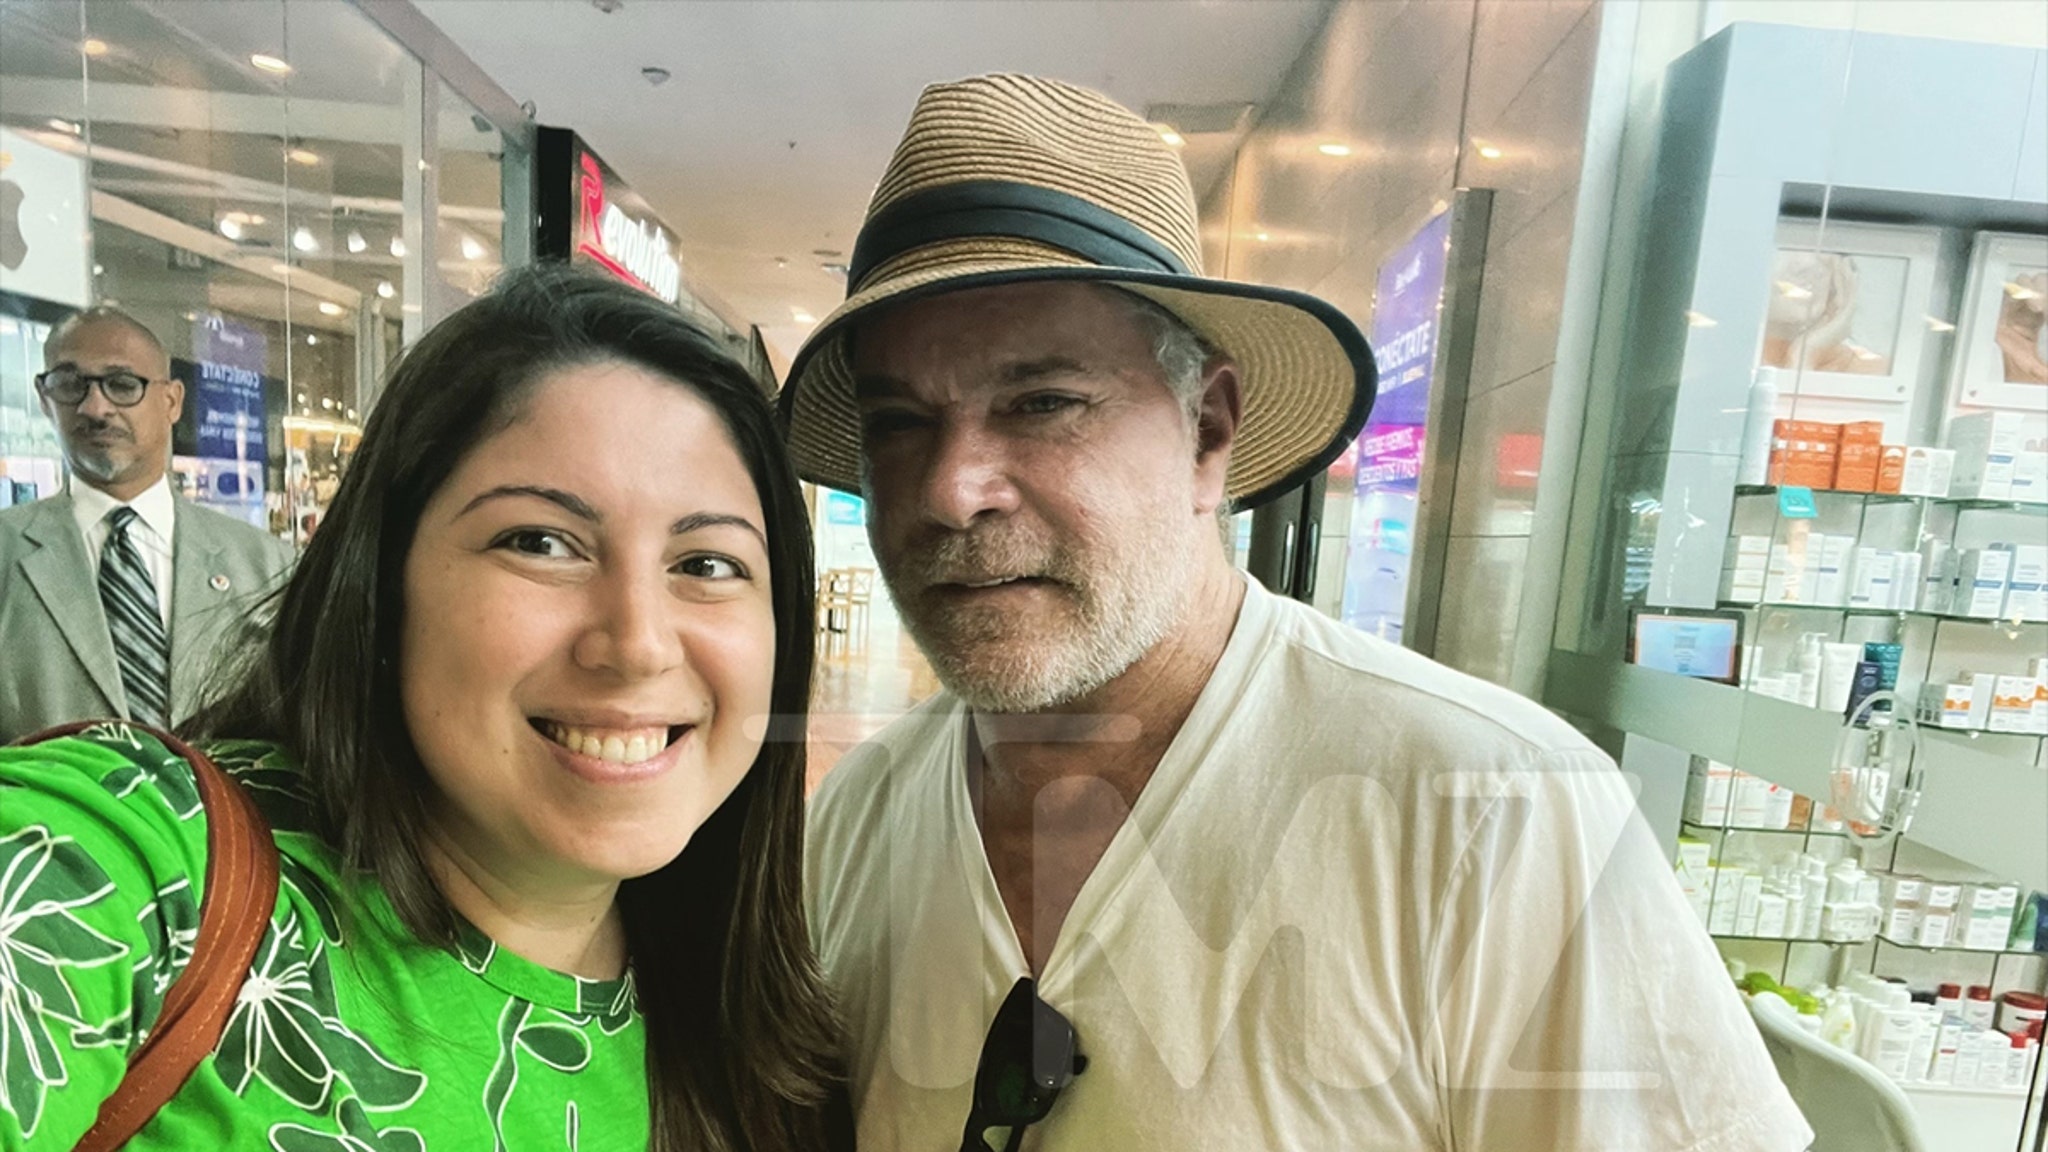 Ray Liotta's Selfie With Fan Days Before Death, Looked Healthy & Vibrant thumbnail